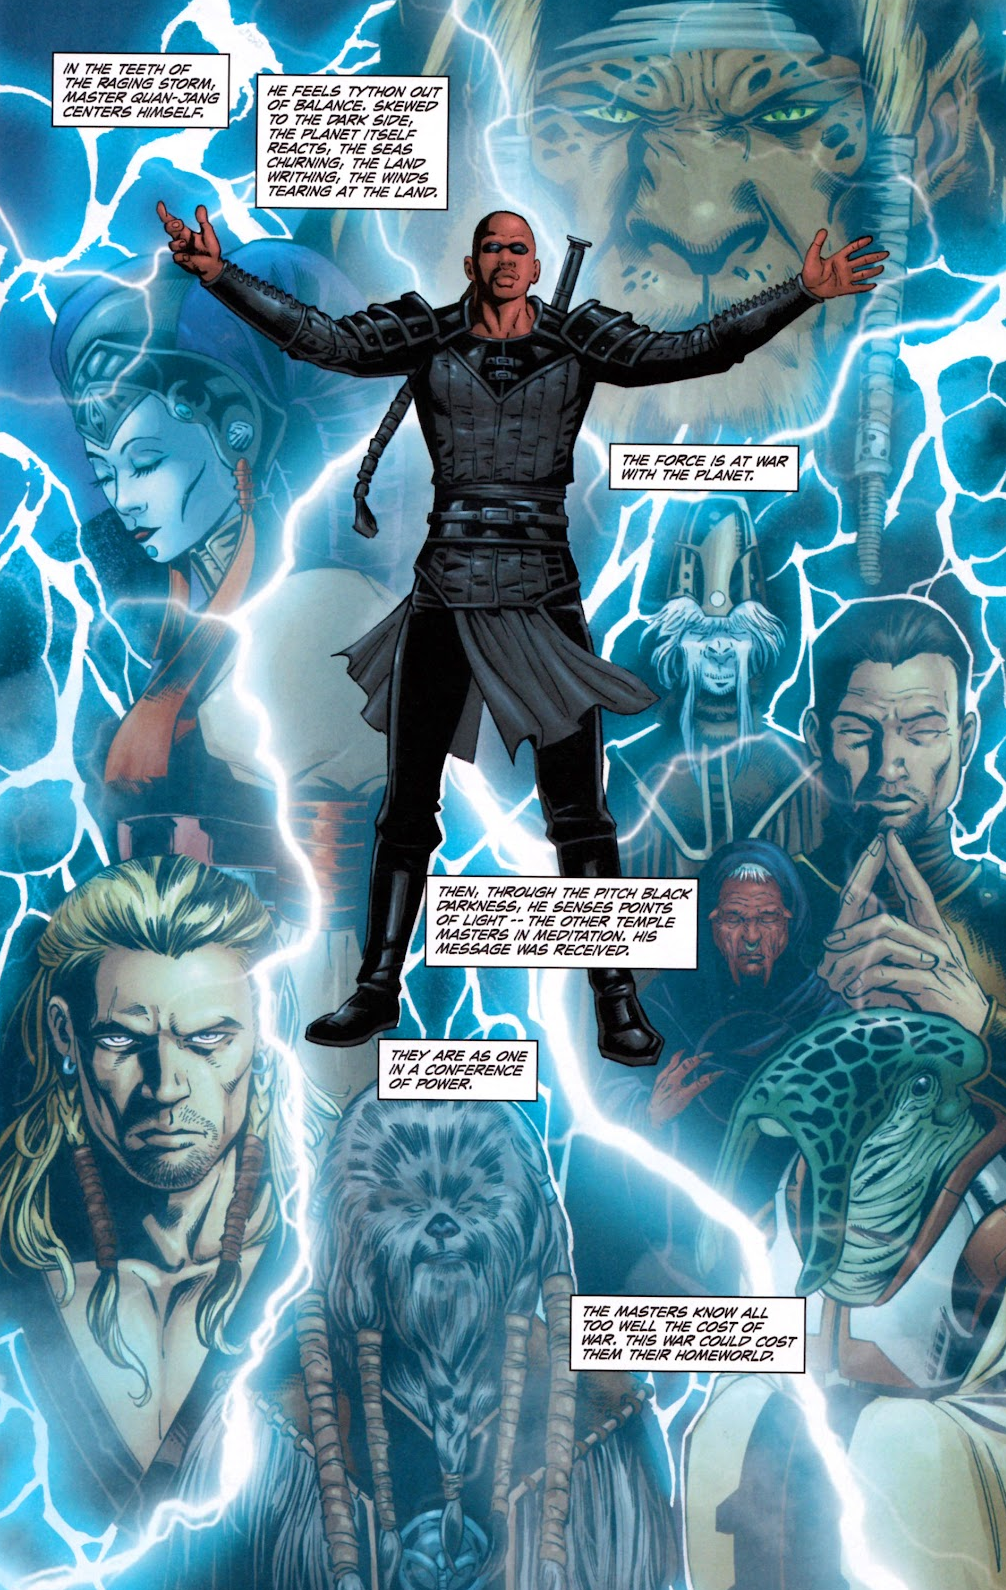 Quan-Jang reaches out to his fellow Je'daii practitioners in Star Wars: Dawn of the Jedi - Force War Vol. 1 #5 (2014), Dark Horse Comics. Words by John Ostrander, art by Jan Duursema, Darn Parsons, Wes Dzioba, and Michael Heisler.